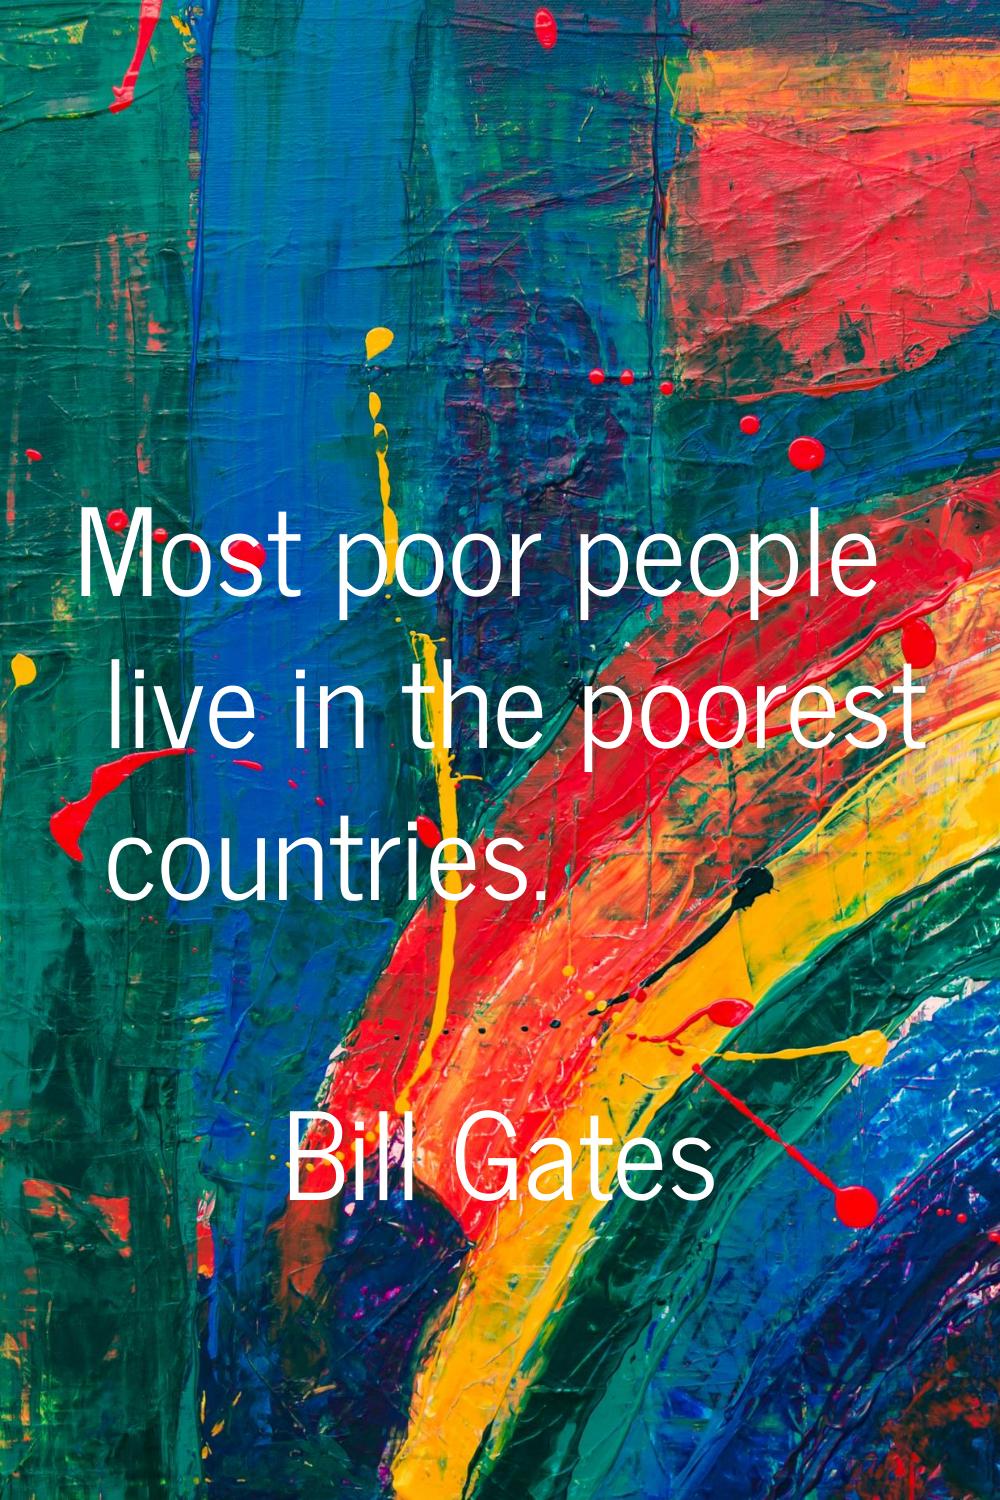 Most poor people live in the poorest countries.